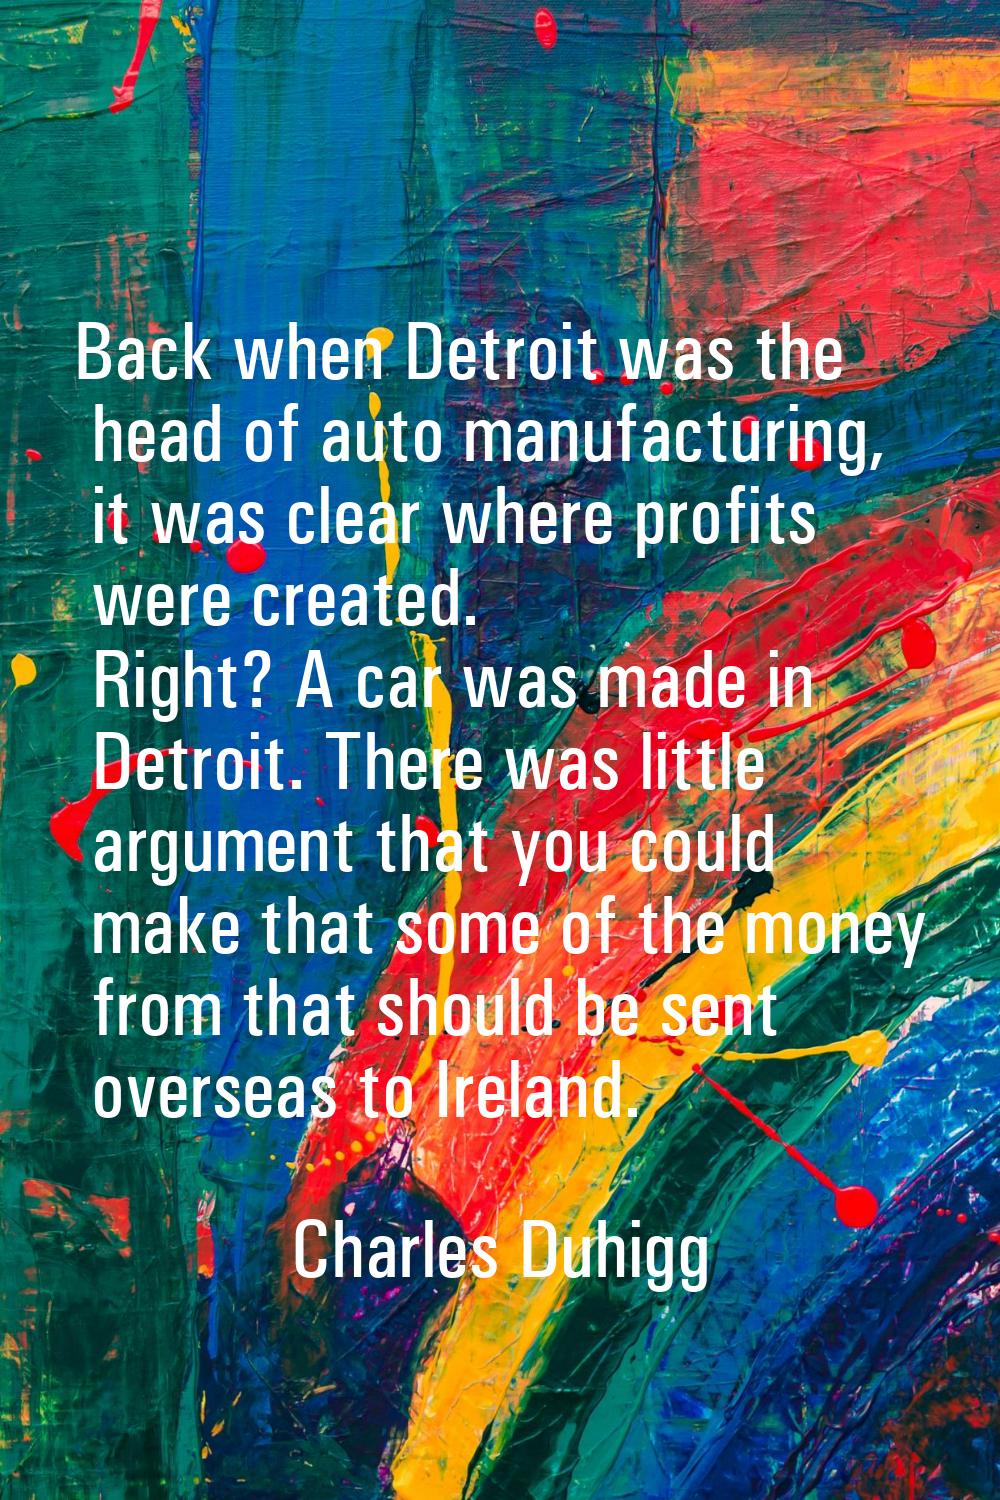 Back when Detroit was the head of auto manufacturing, it was clear where profits were created. Righ